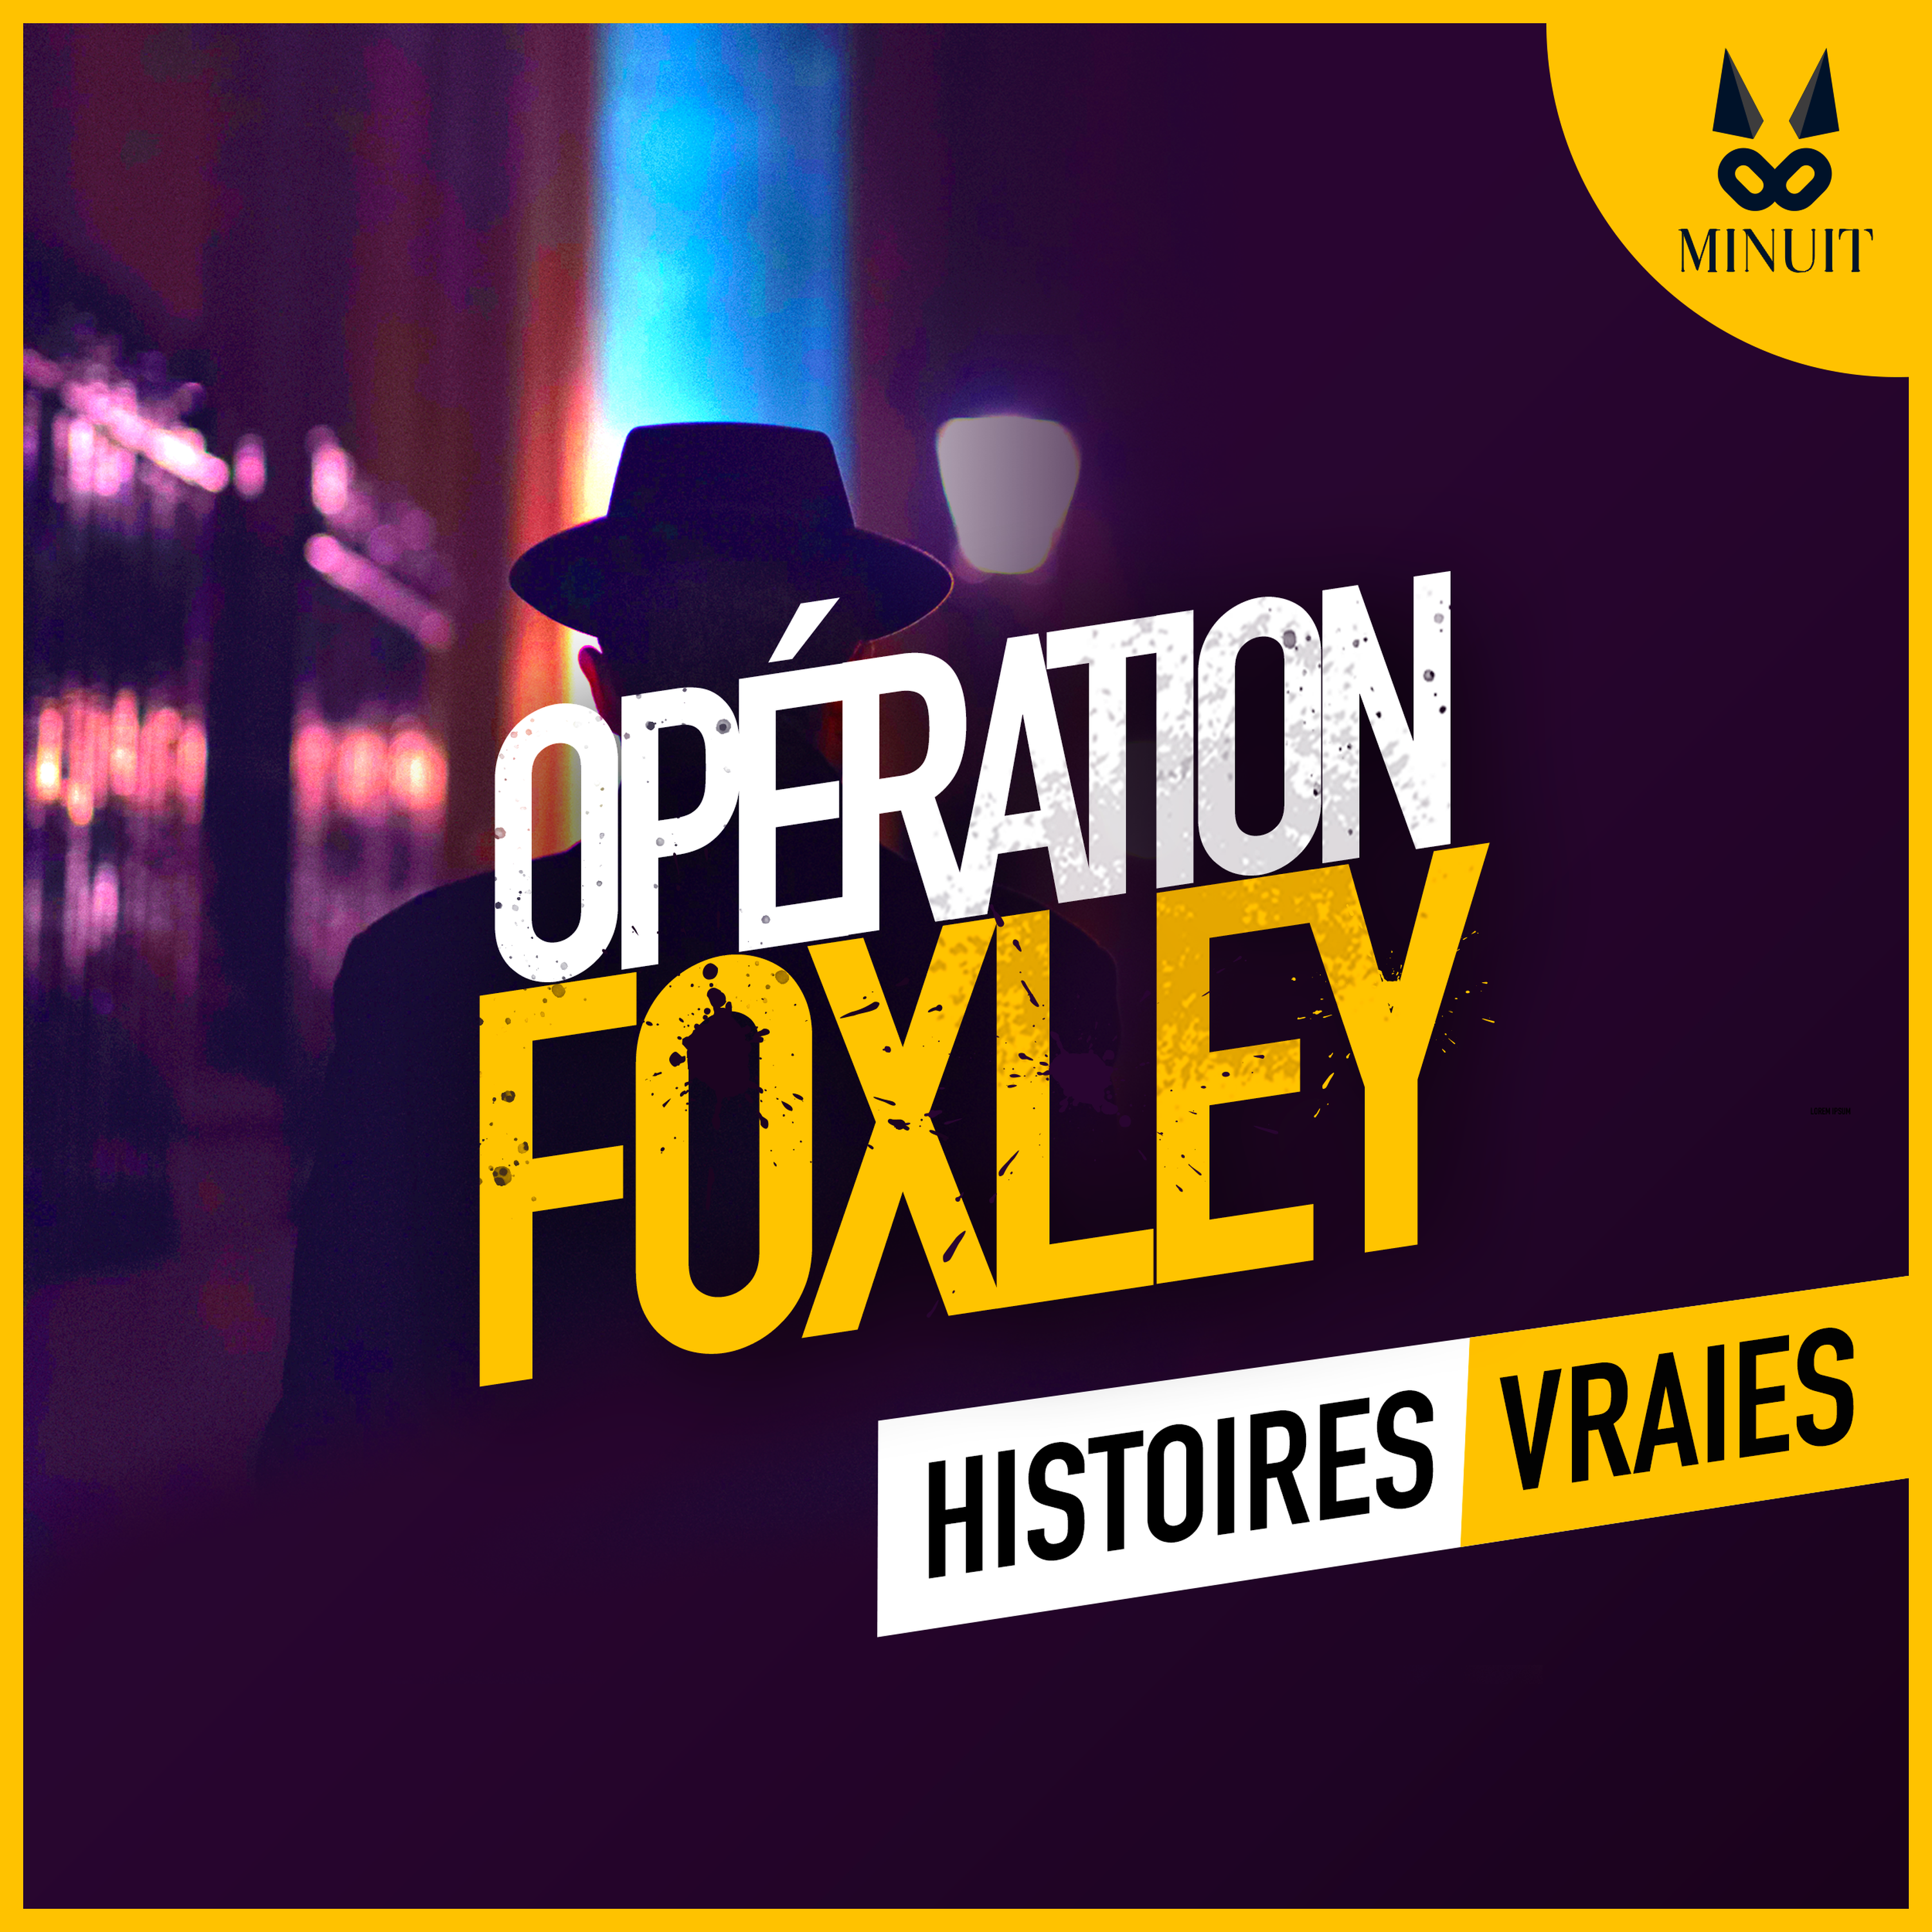 Opération FOXLEY